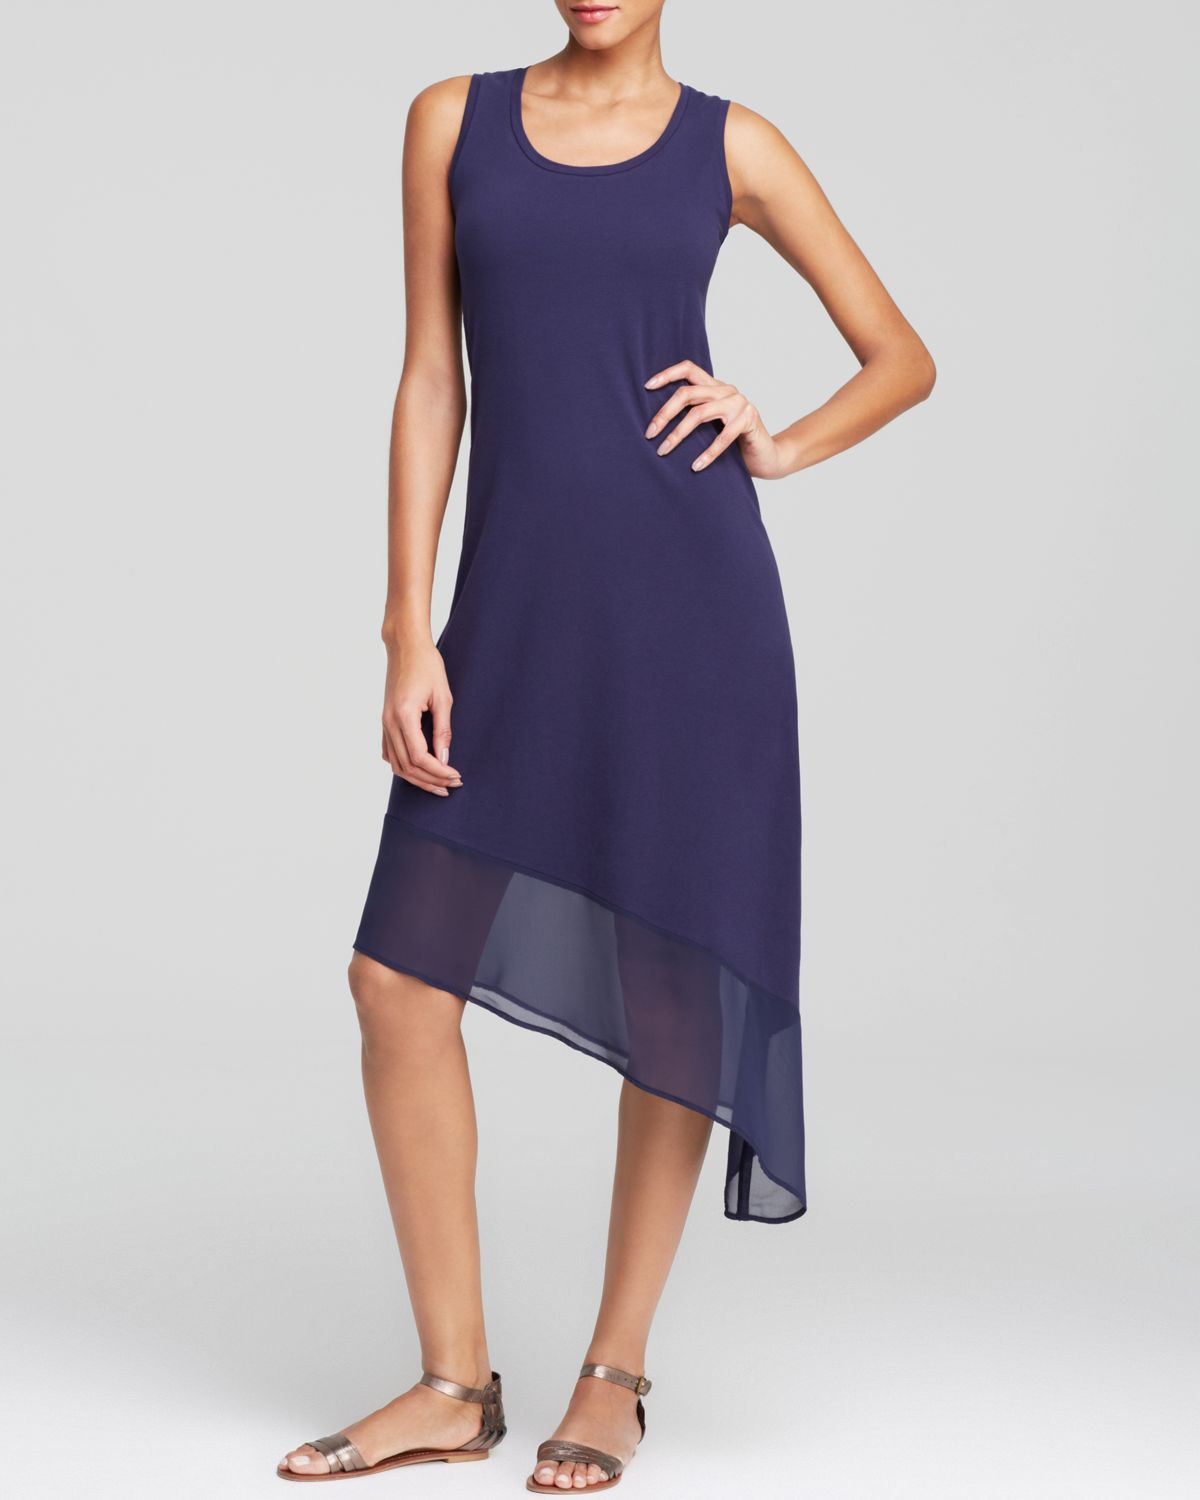 Lyst Tommy  Bahama  Asymmetrical Dress  Swim  Cover Up  in Blue